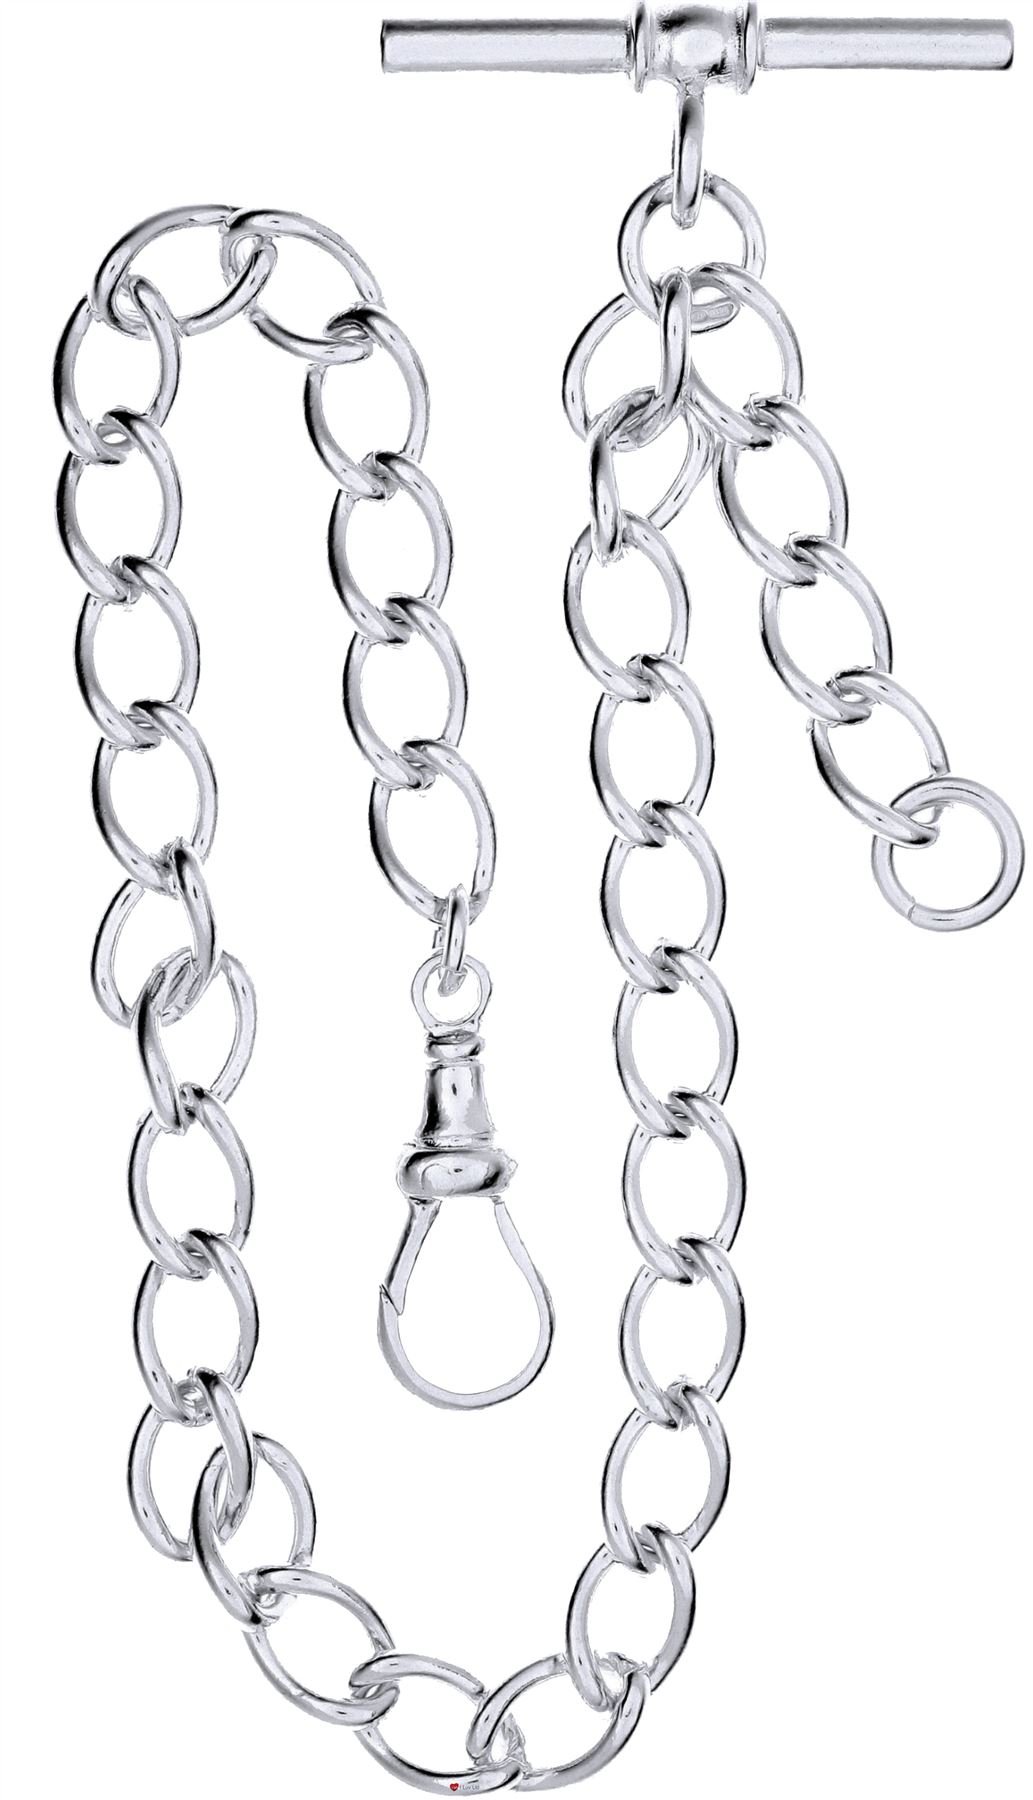 Single Albert Chain for Pocket Watch - Large Link Sterling Silver - Gents Gift